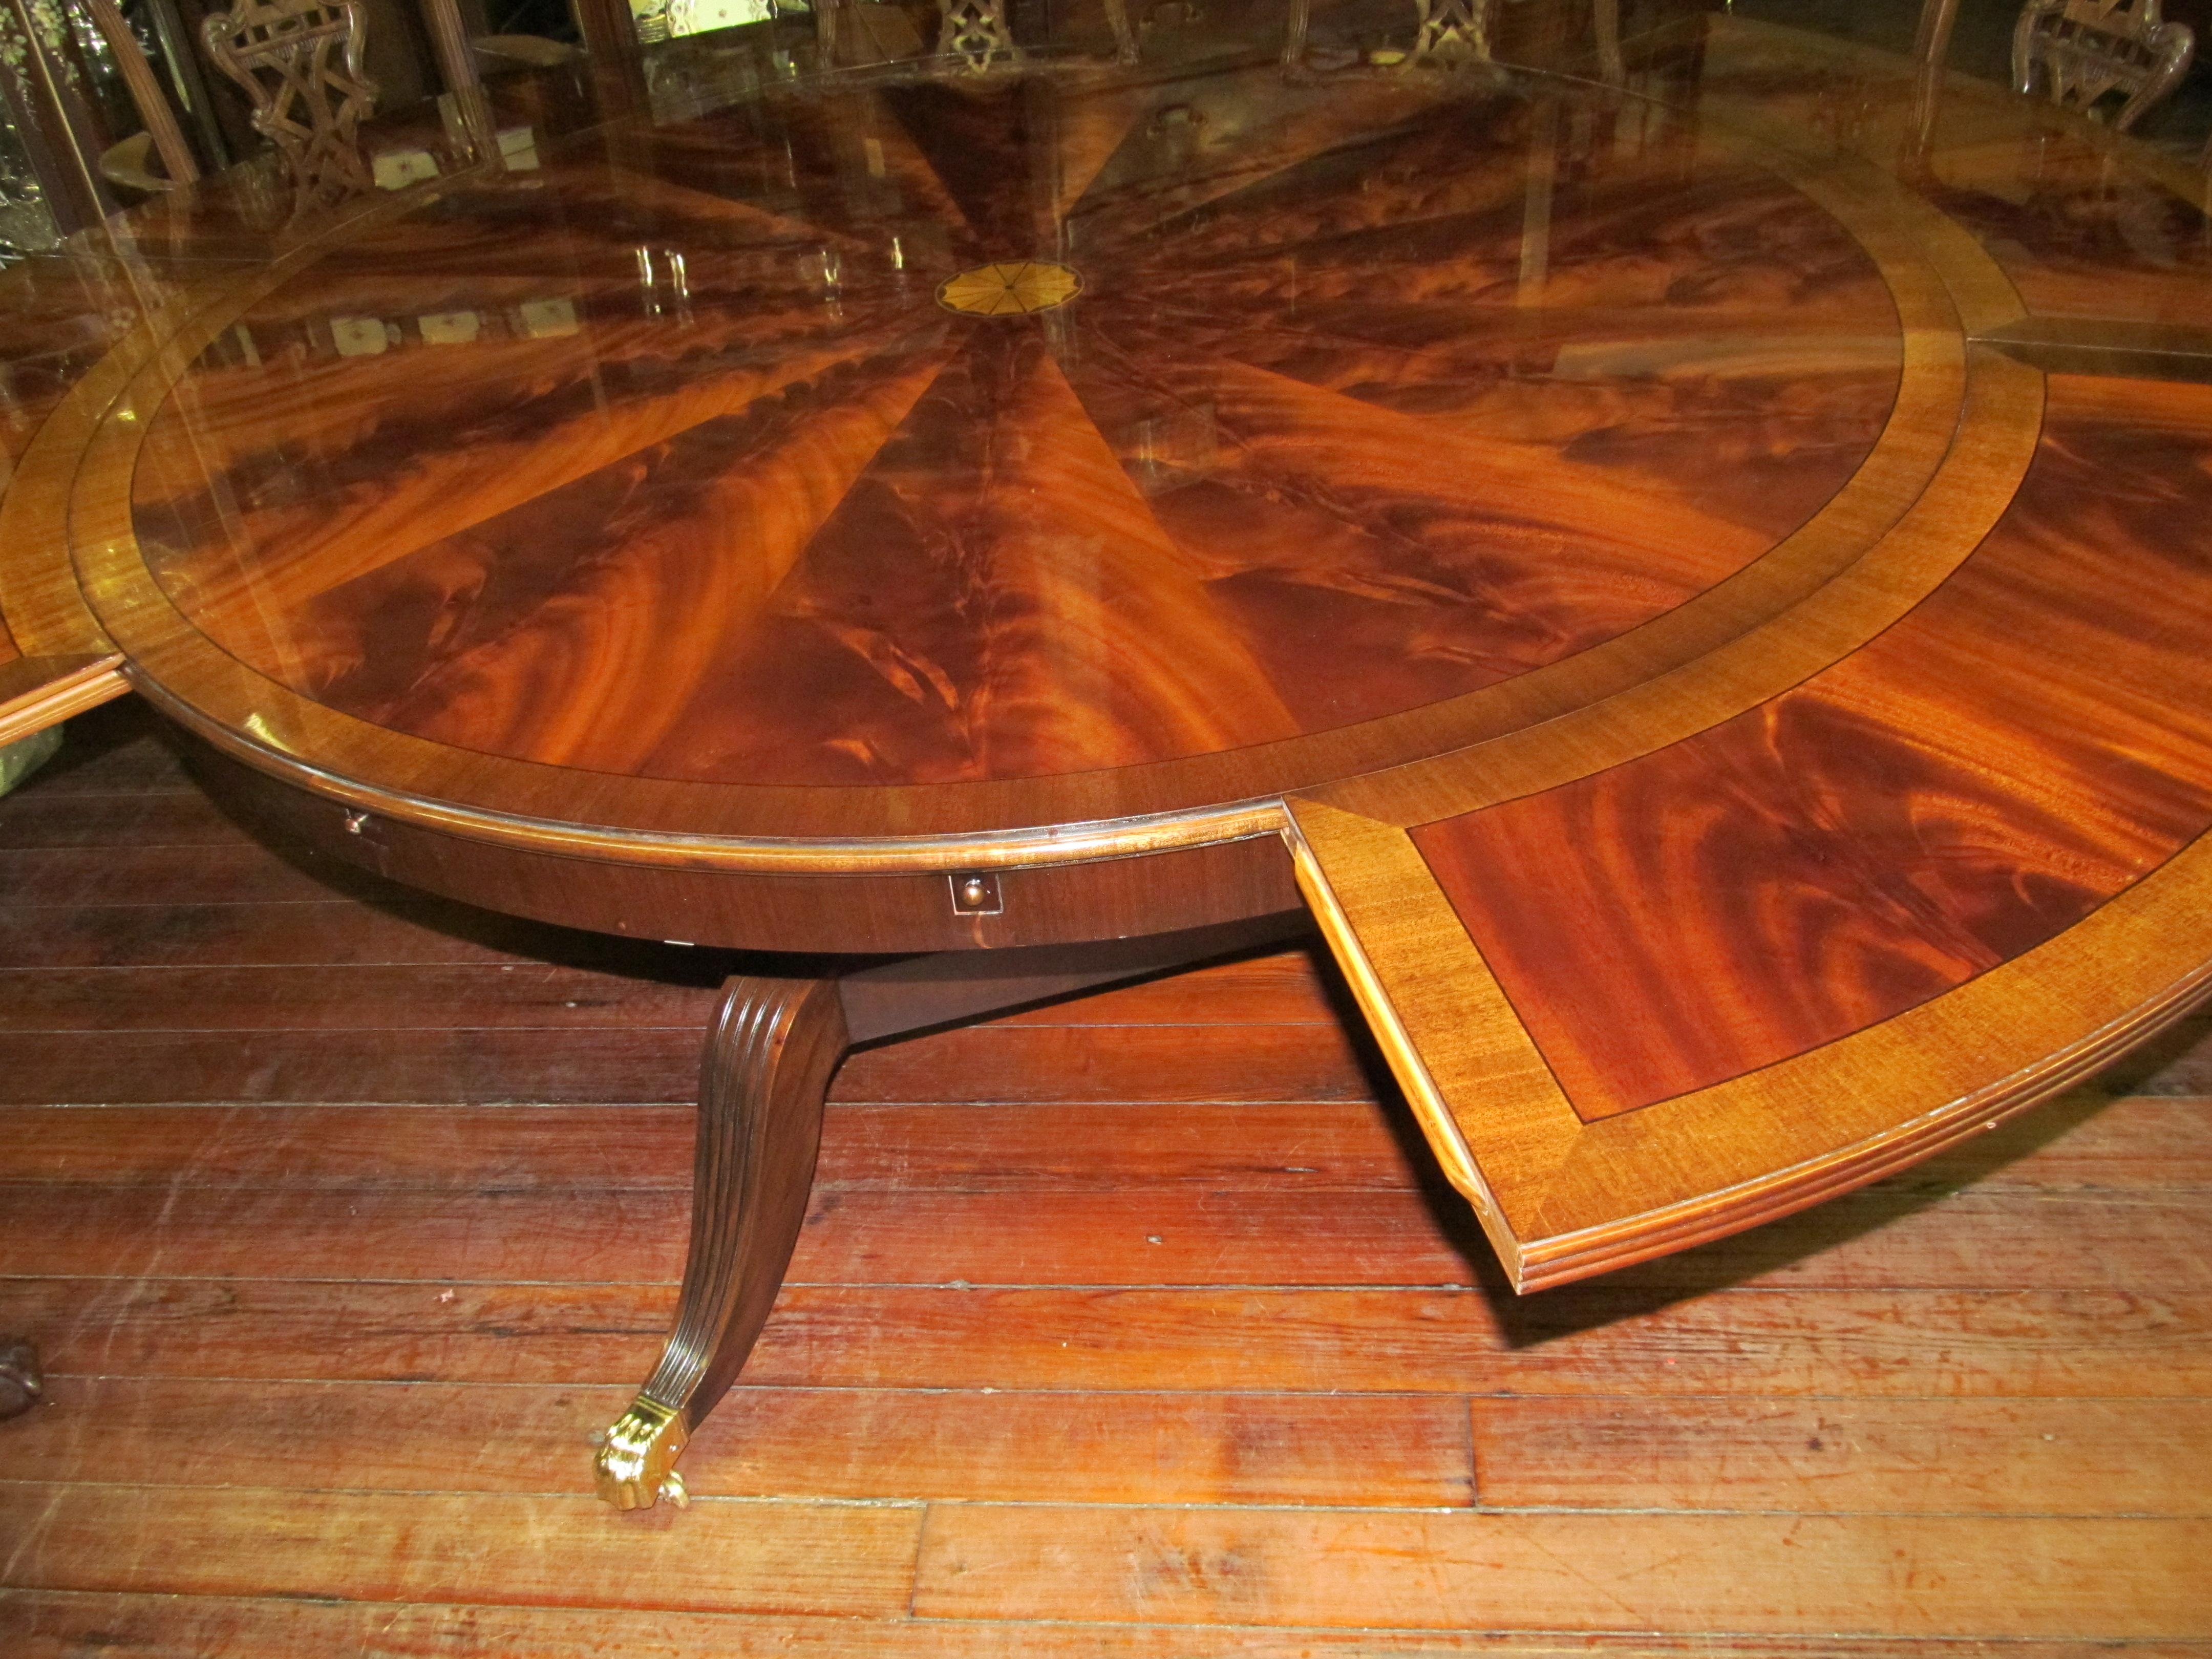 Benchmade Bookmatched Flame Mahogany Perimeter Leaf Circular Dining Table 8